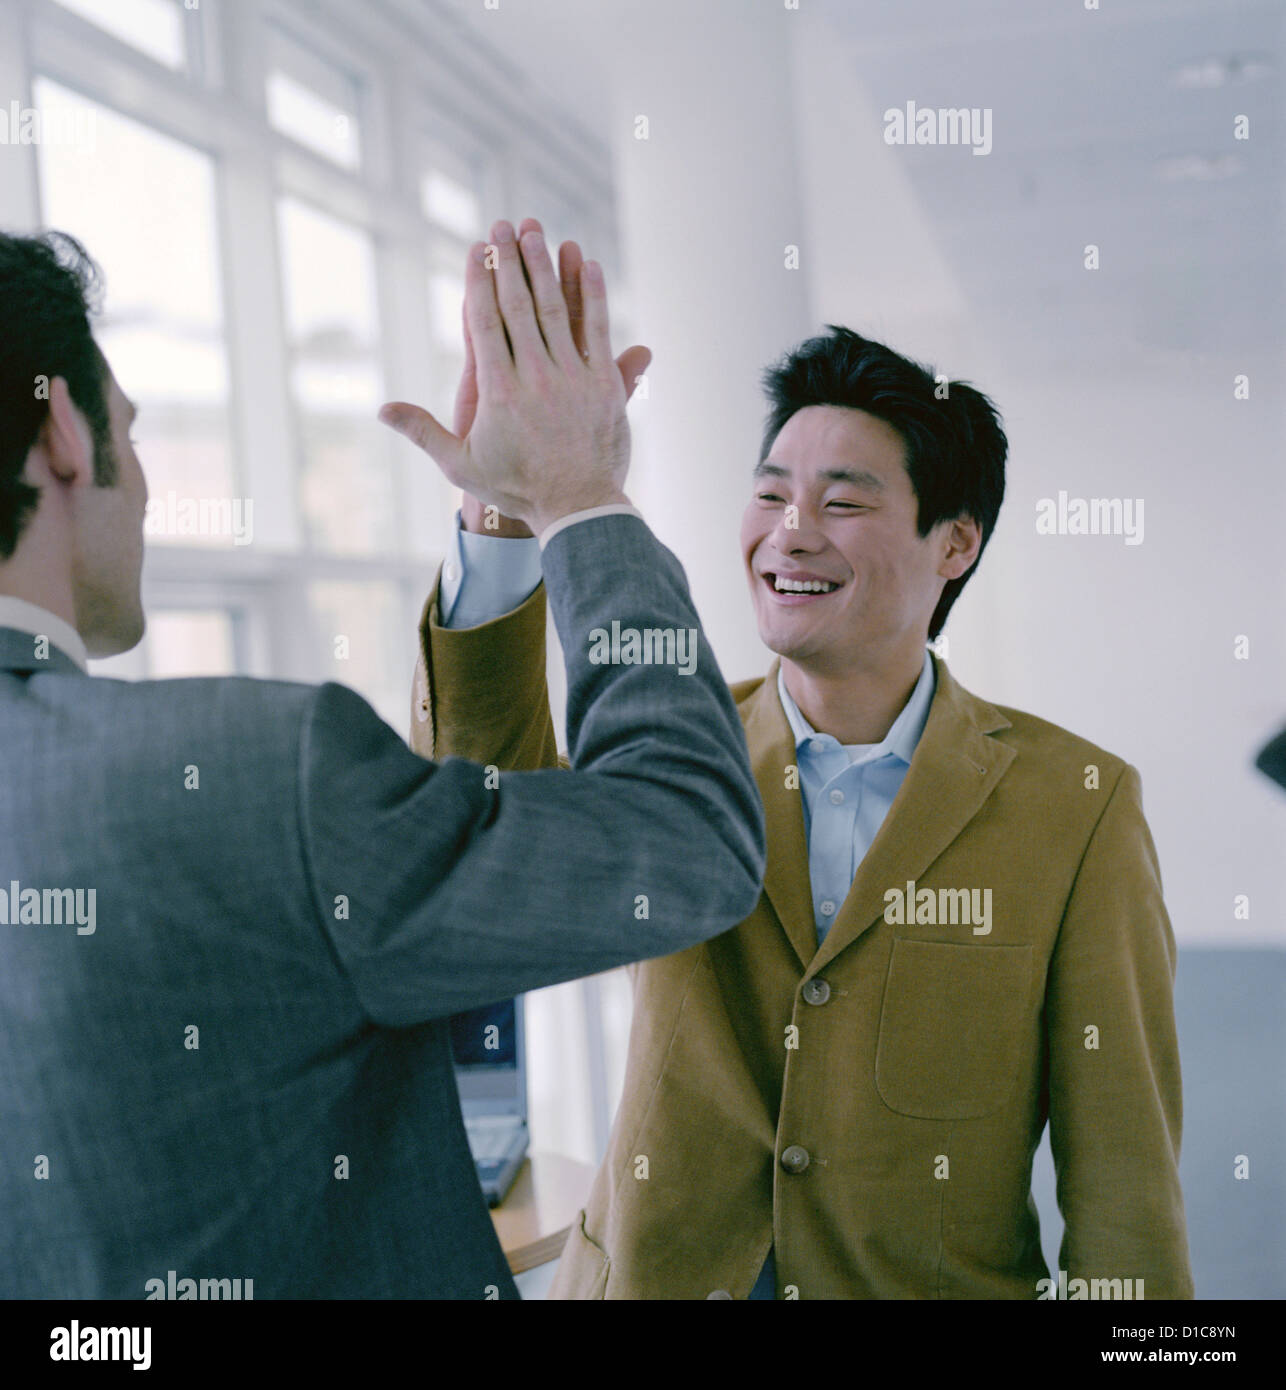 Two business people to give so a high five License free except ads and billboards Stock Photo